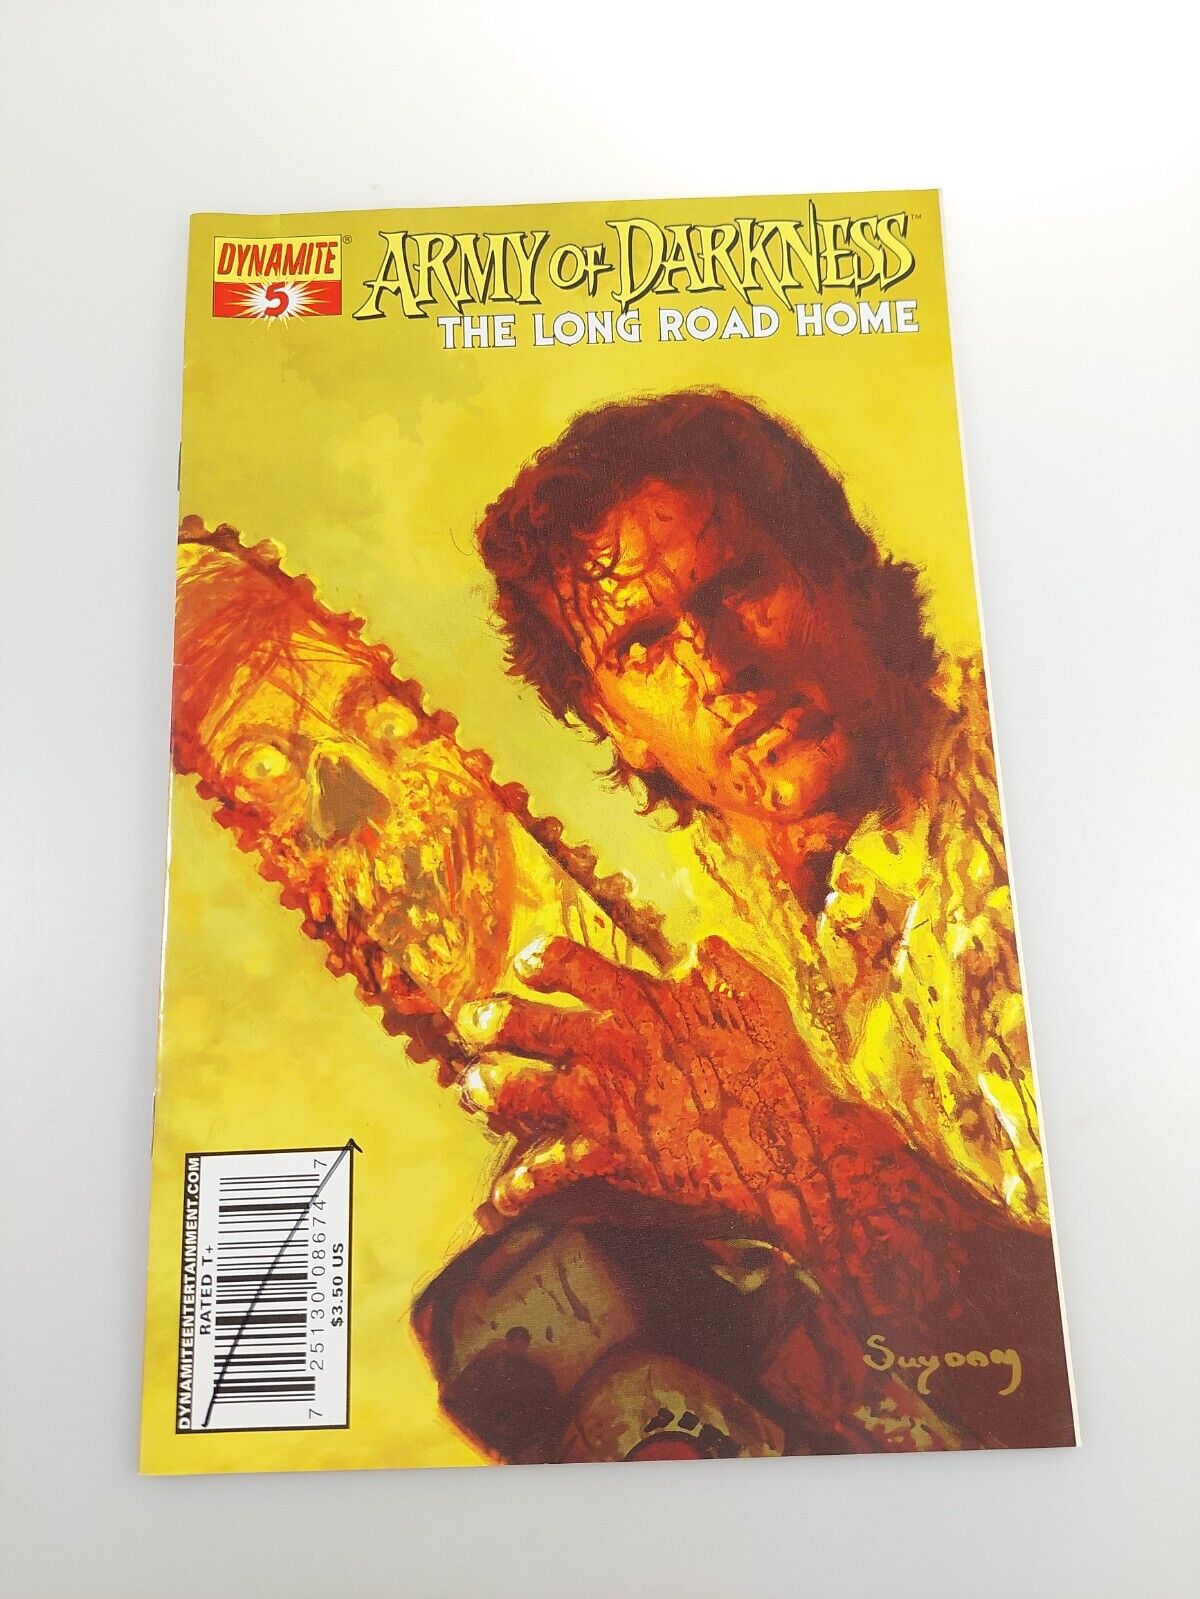 Dynamite Comics: ARMY OF DARKNESS 'THE LONG ROAD HOME' #5 2007 Art Suydam Cover